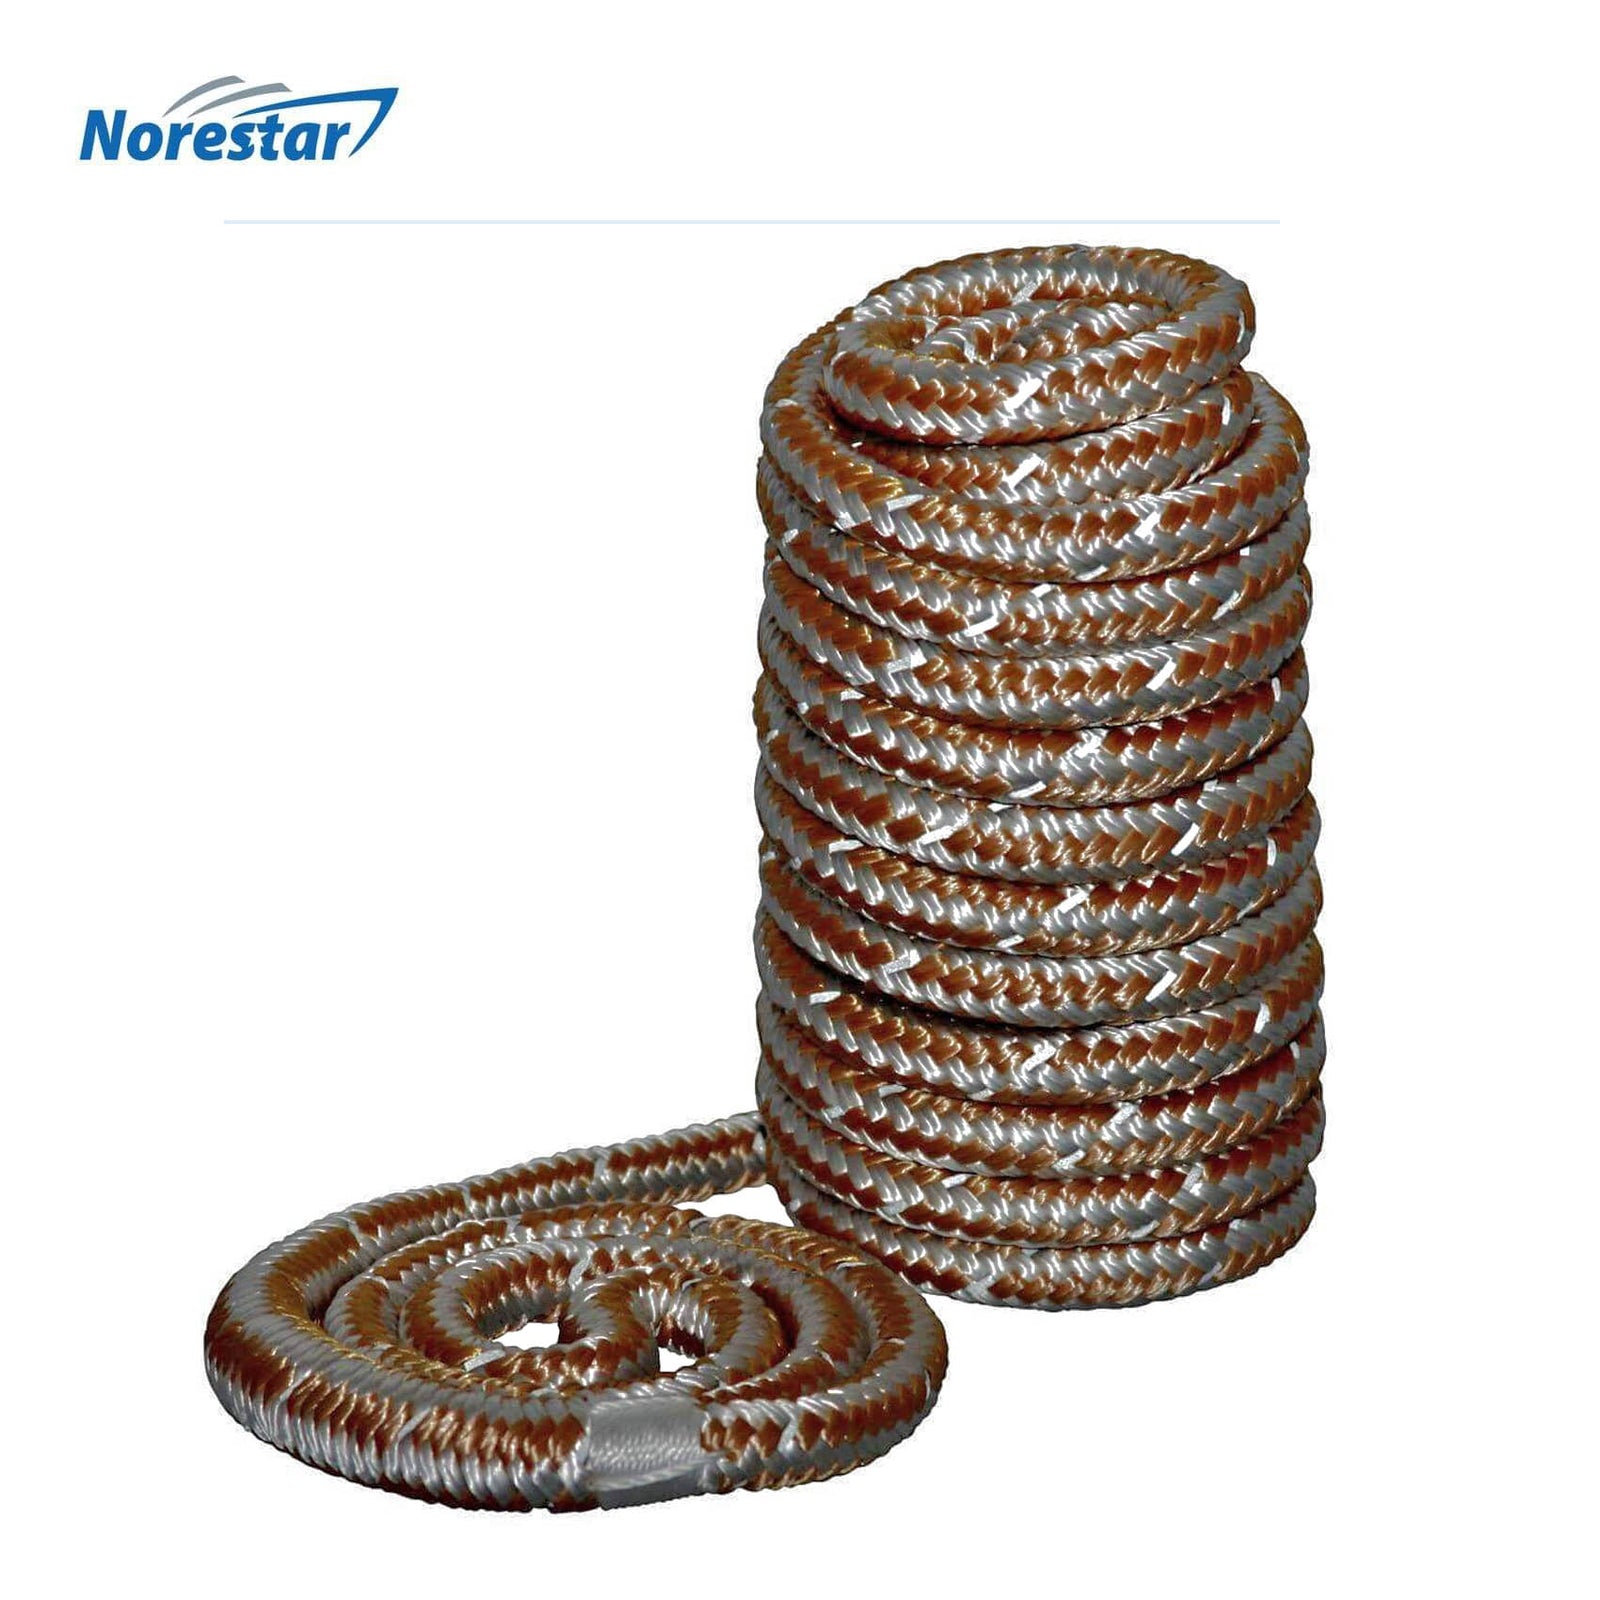 High-Visibility Reflective Braided Nylon Dock Line, Gold - in Low Light